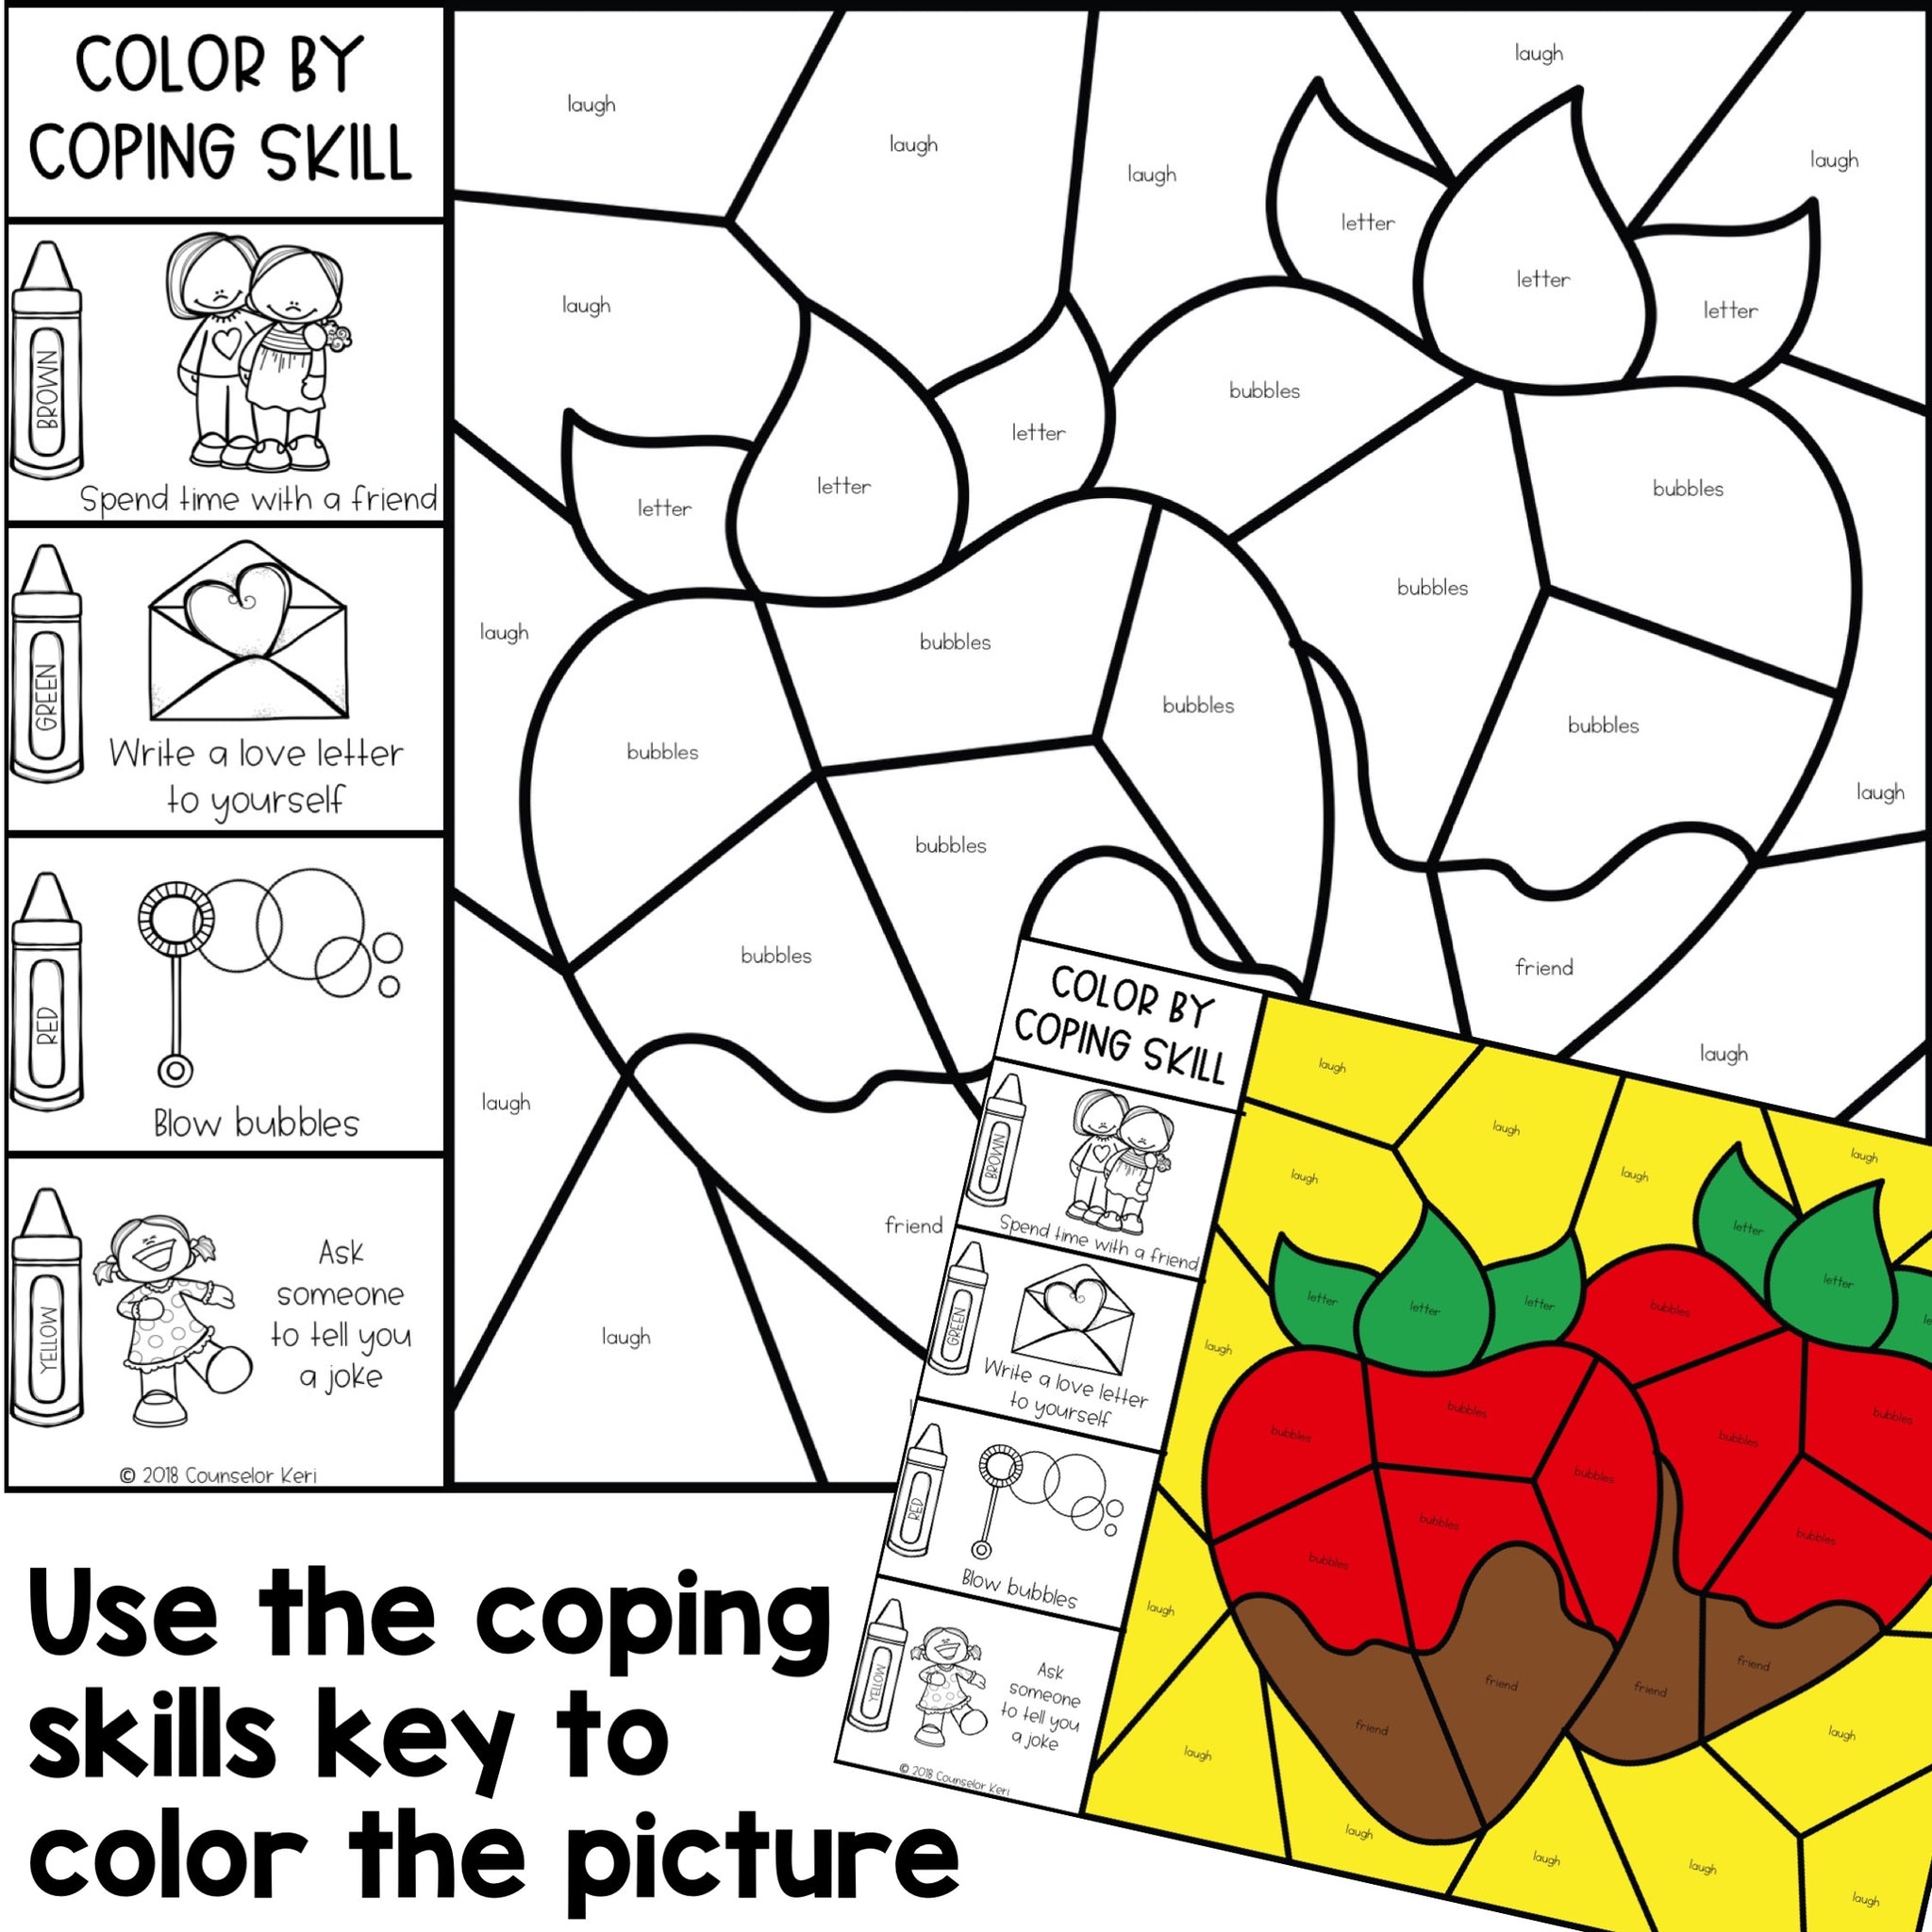 color-by-coping-skills-valentine-s-day-activity-for-elementary-school